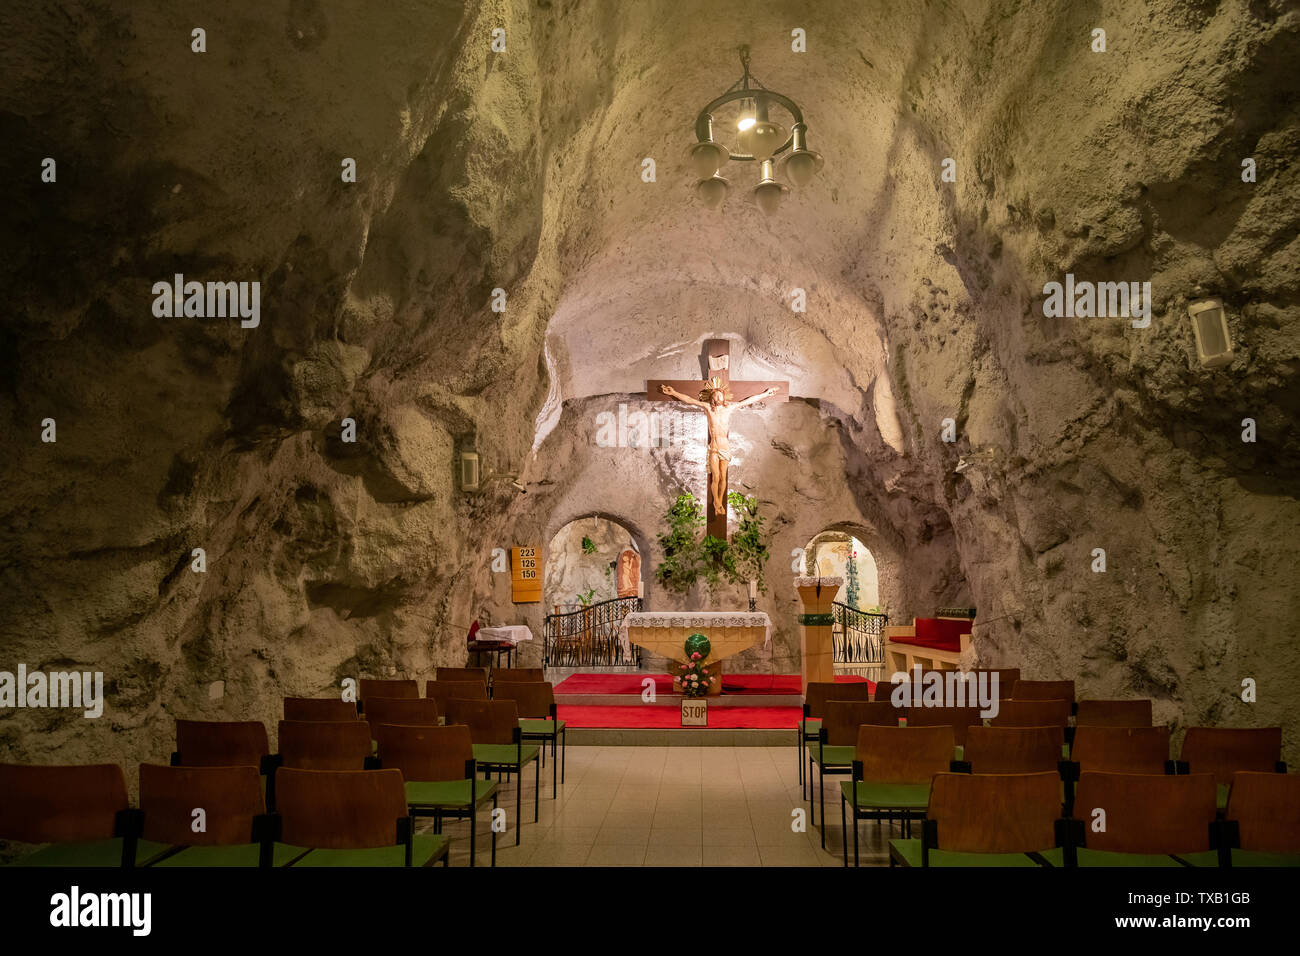 Budapest, NOV 11:  Interior view of the famous Gellért Hill Cave on NOV 11, 2018 at Budapest, Hungary Stock Photo